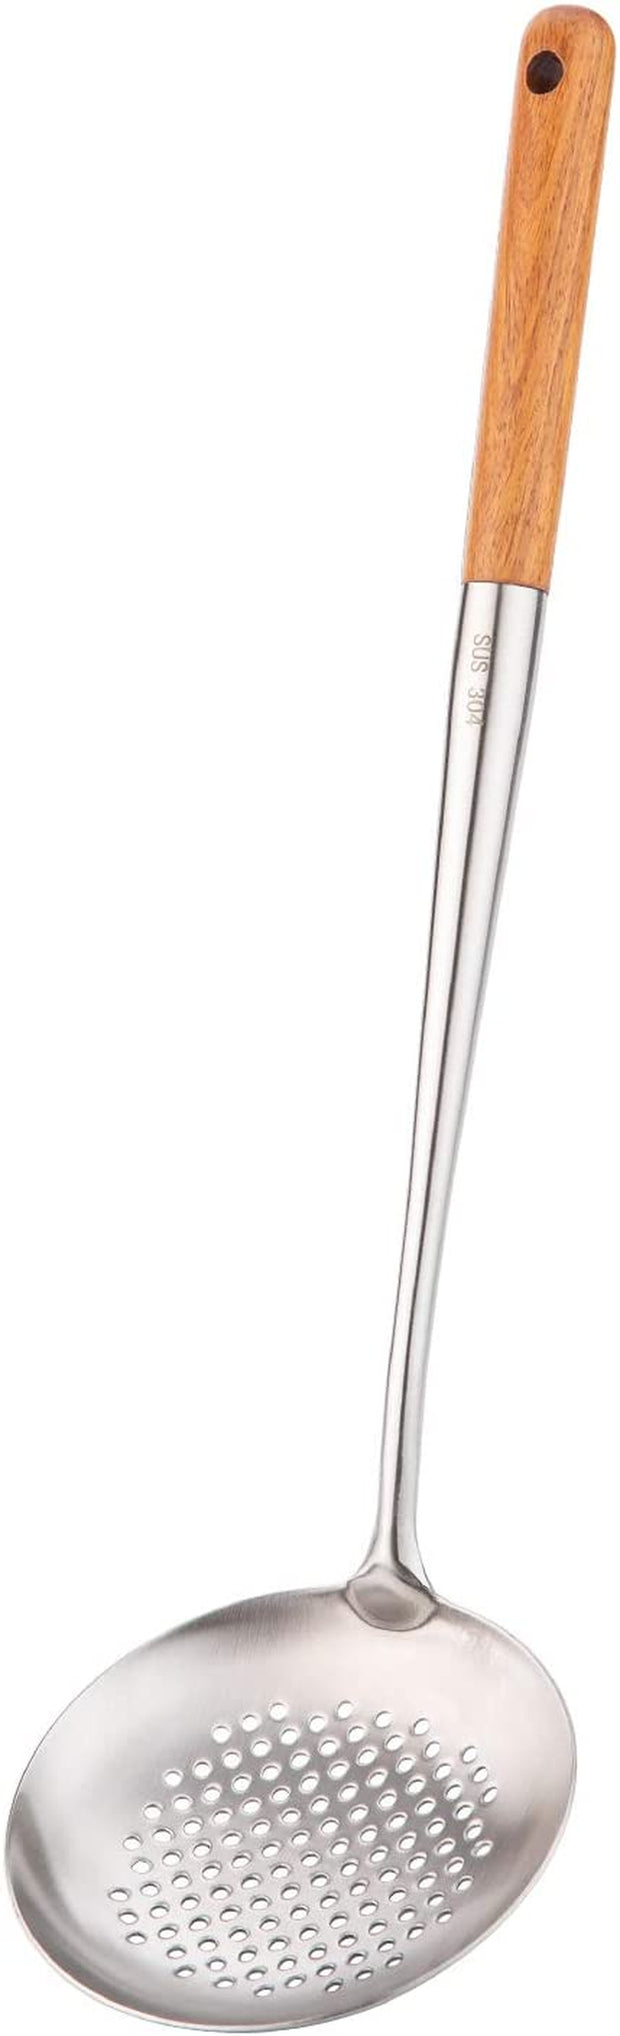 Wok Spatula and Ladle,Skimmer Ladle Tool Set, 17Inches Spatula for Wok, 304 Stainless Steel Wok Spatula.